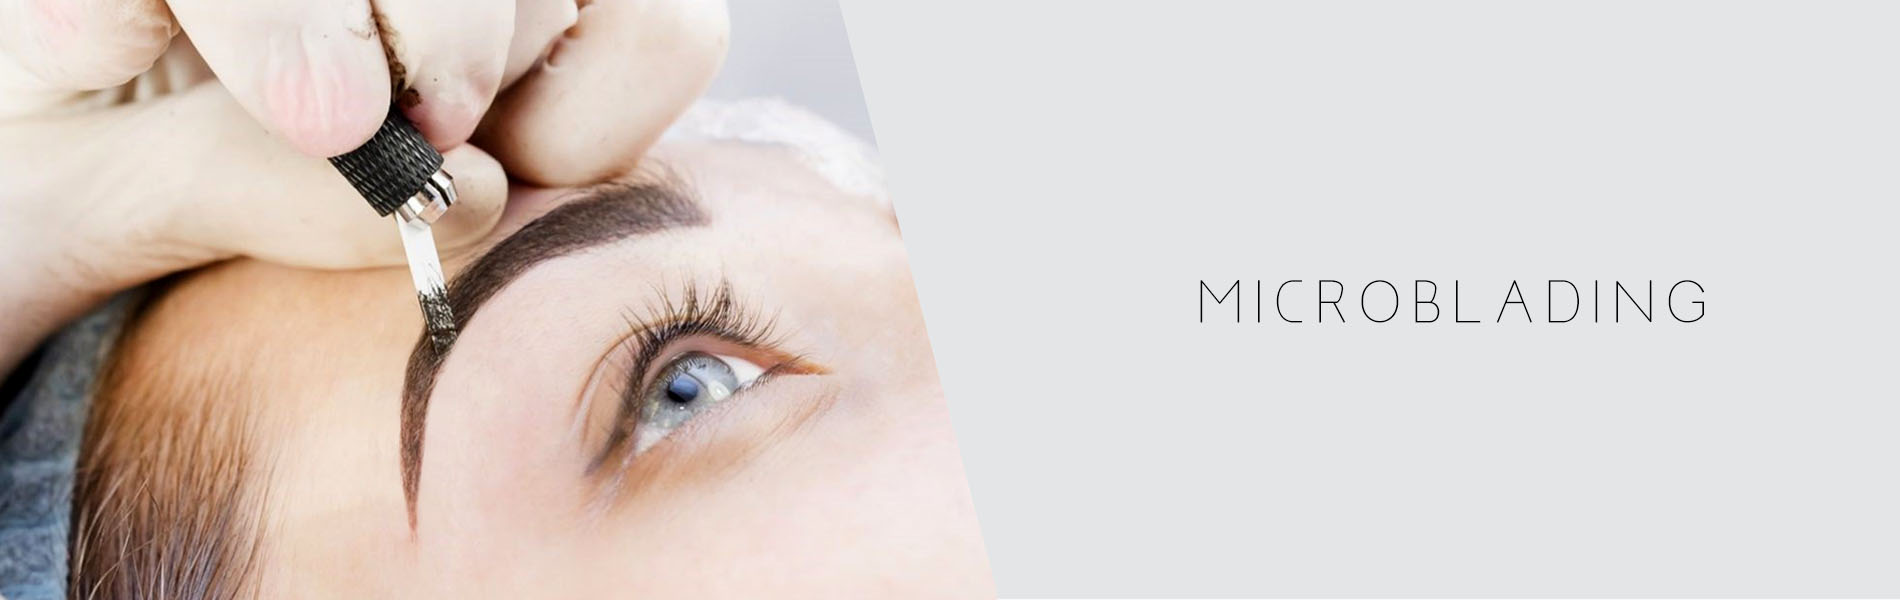 MICROBLADING-Banner